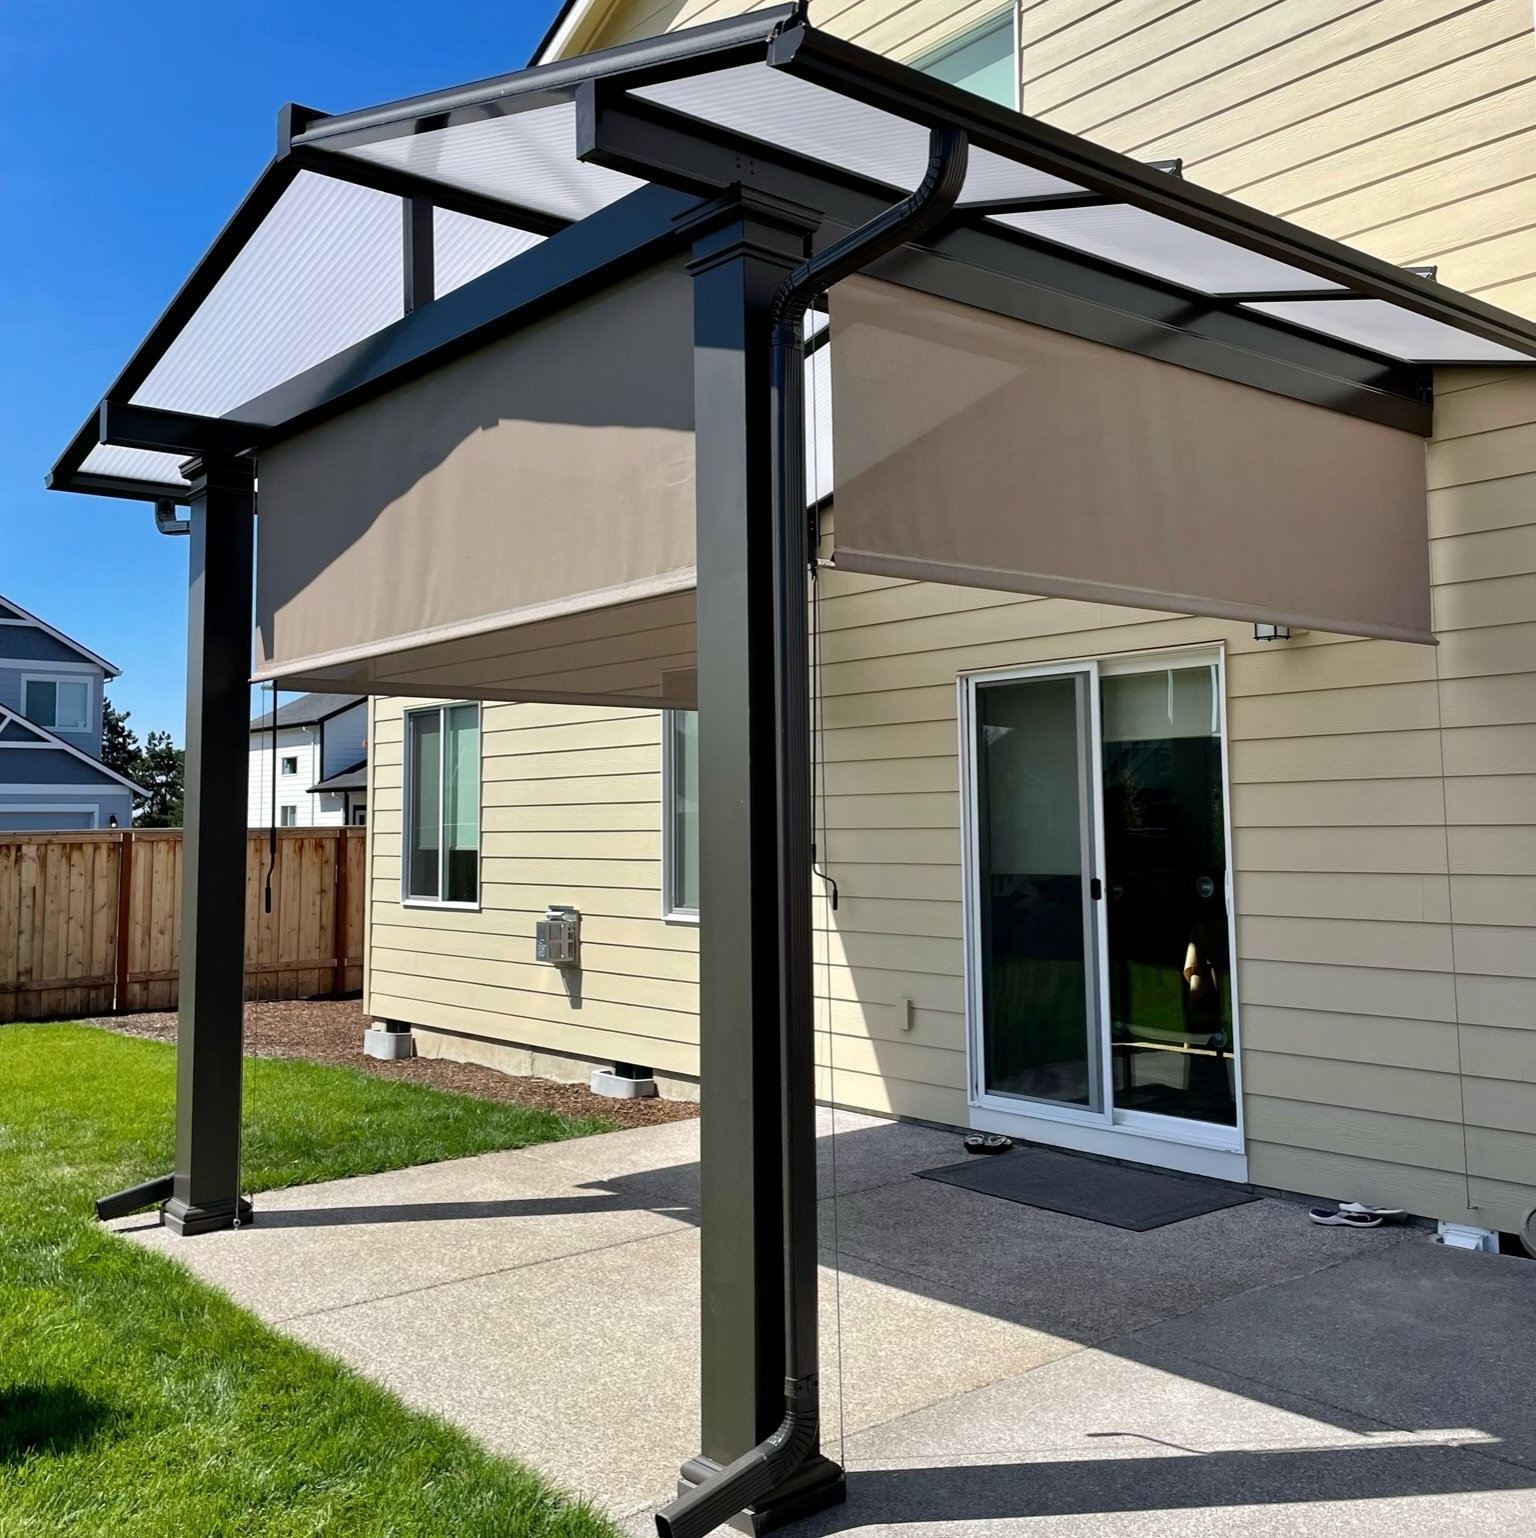 Portland Patio Cover with Track Shade System - Shad half down on Patio Cover